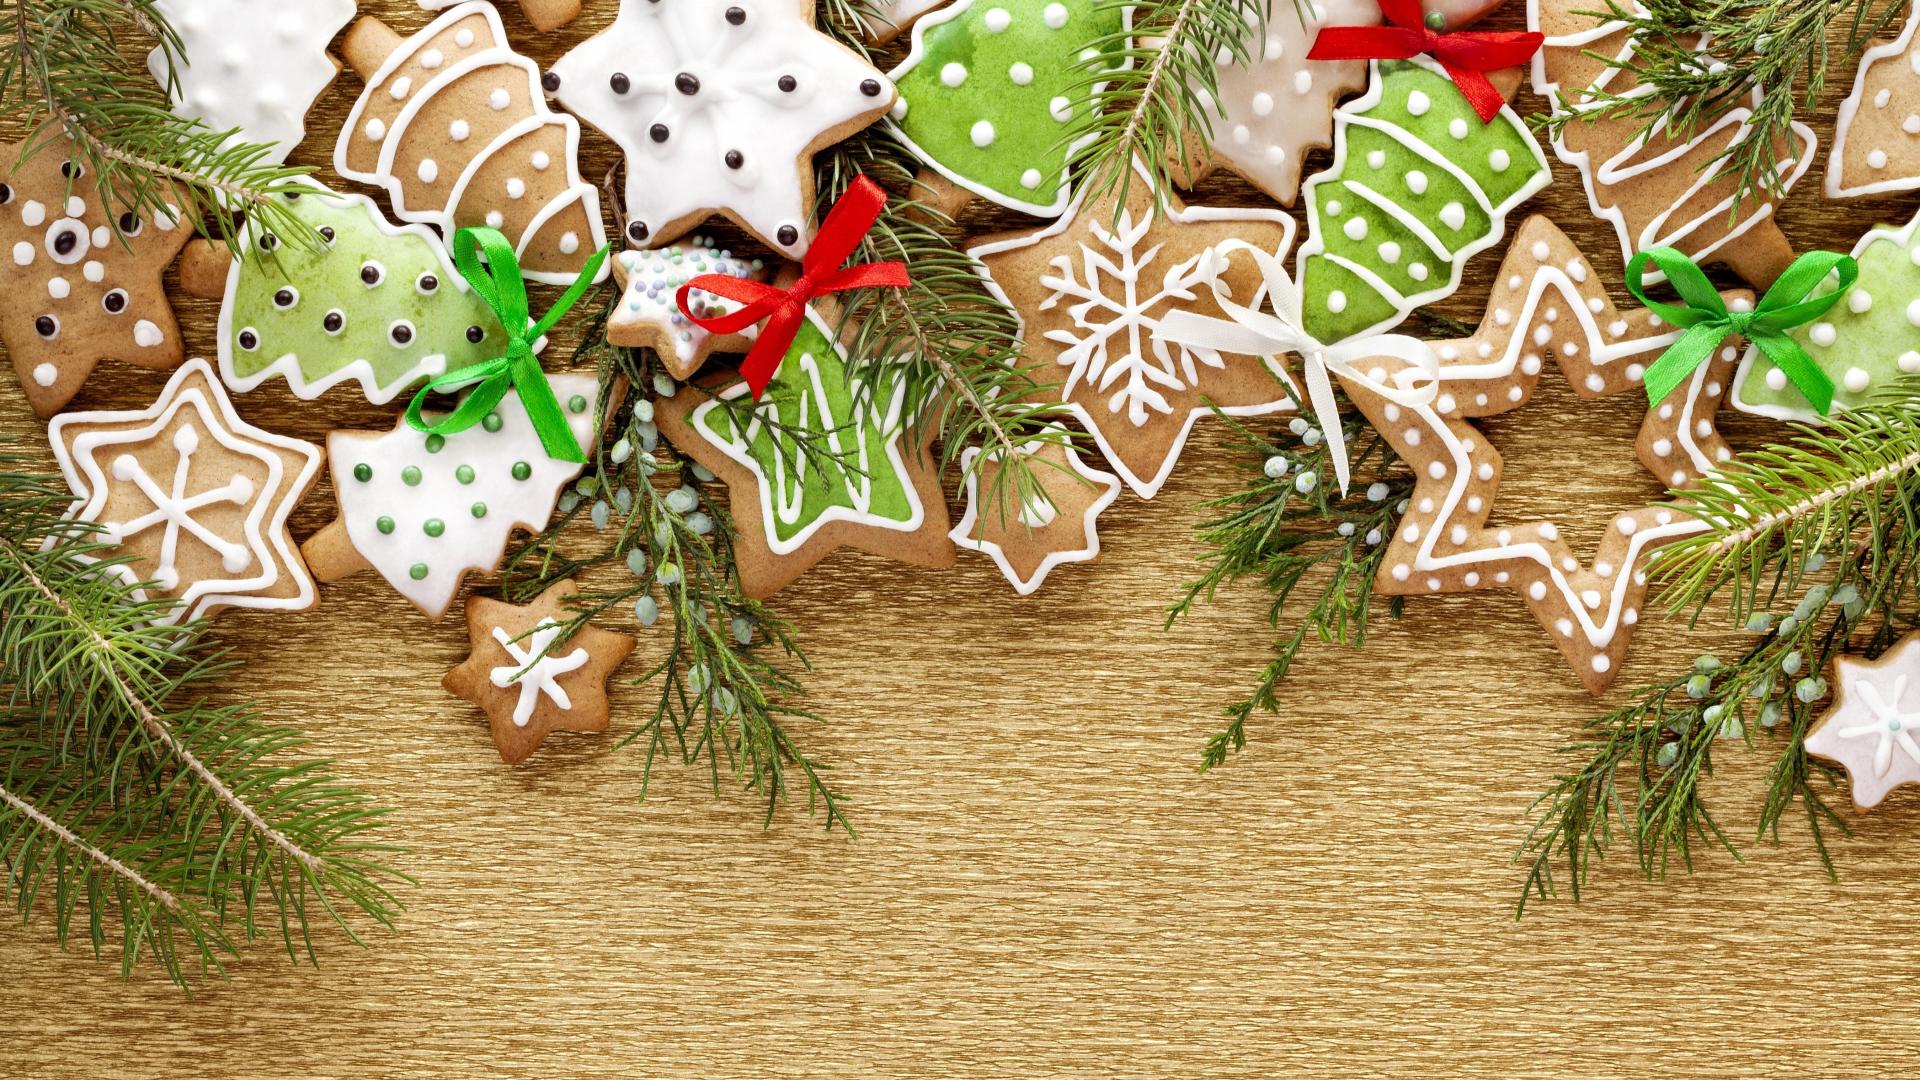 Christmas cookies. +2. Wallpaper Category : Abstract & Vector HD resolutions (16:9): 1366x768 1600x900 1920x1080